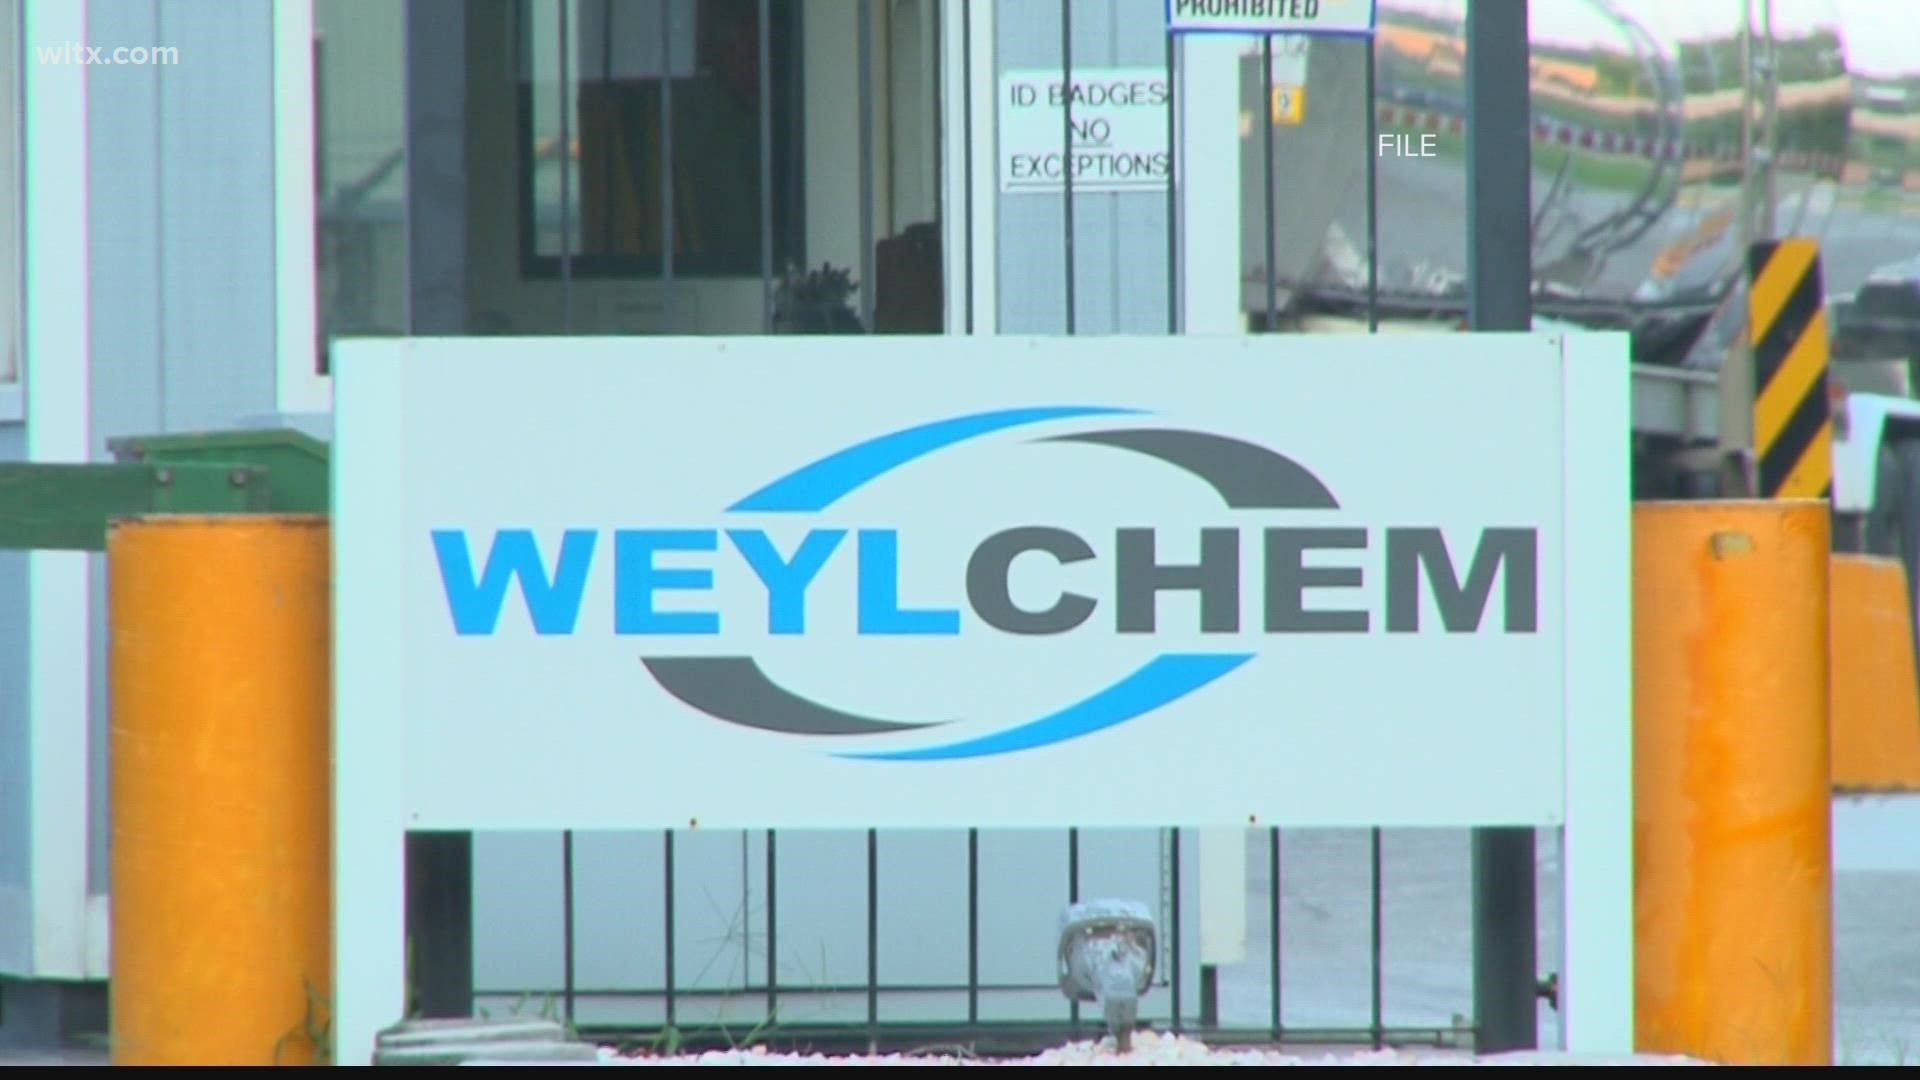 Weylchem U.S. said Thursday that the released material was a vapor mixture of nitric acid and nitrogen oxides (NOx).